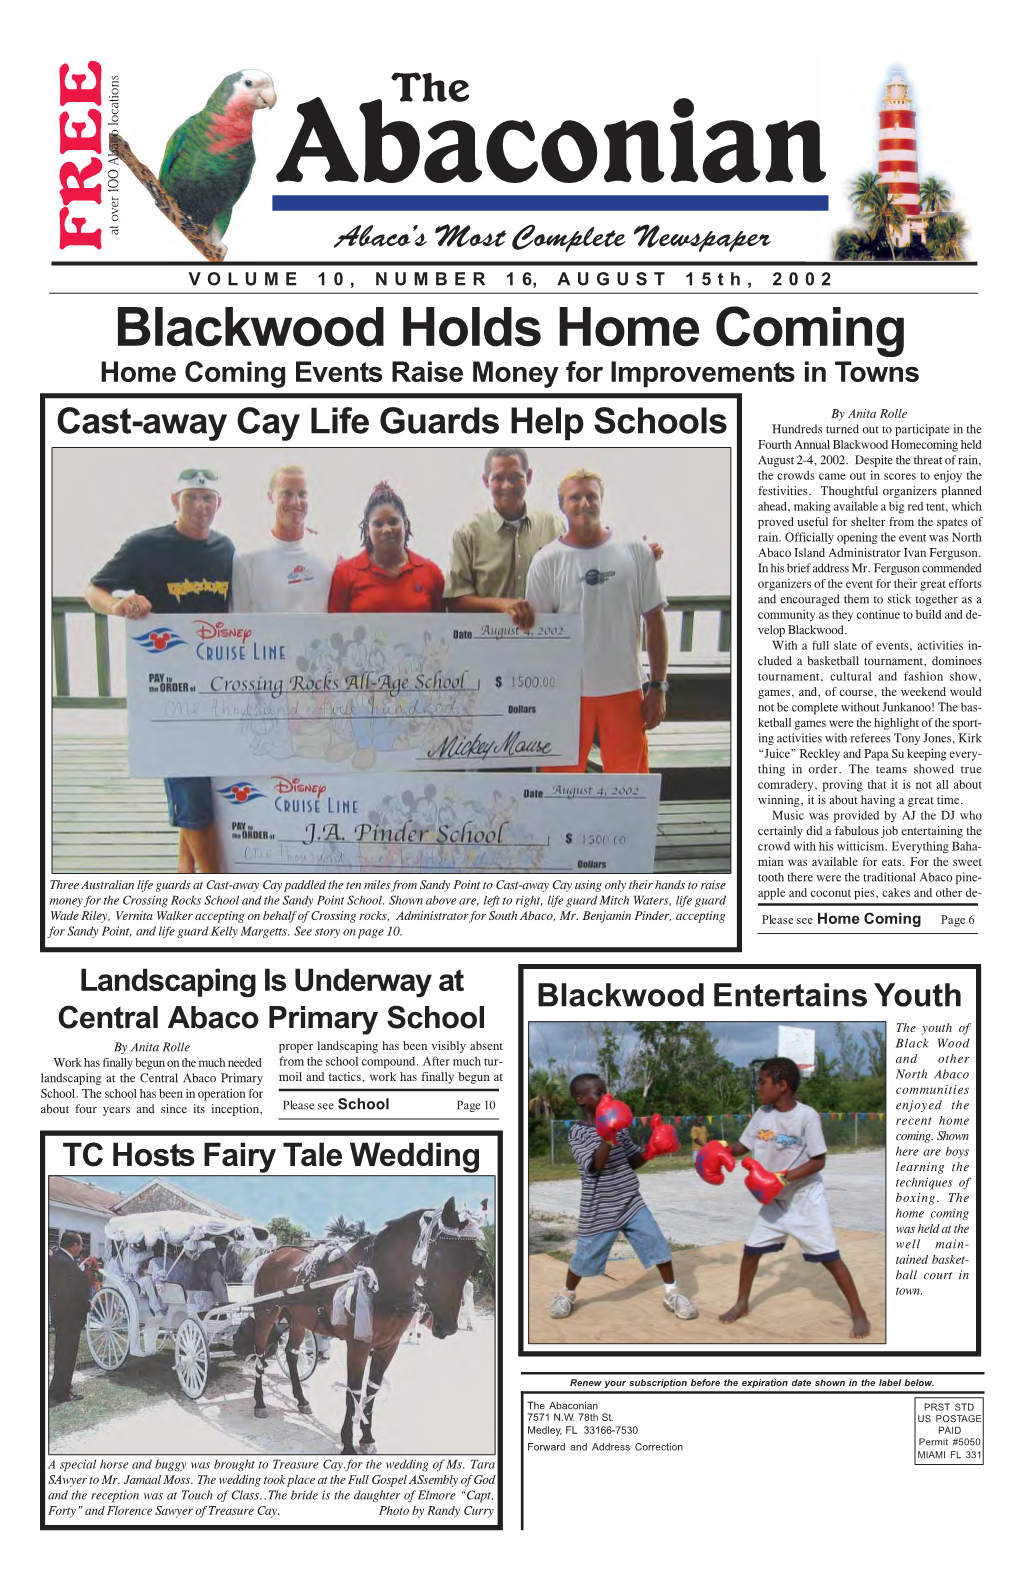 Blackwood Holds Home Coming Home Coming Events Raise Money for Improvements in Towns